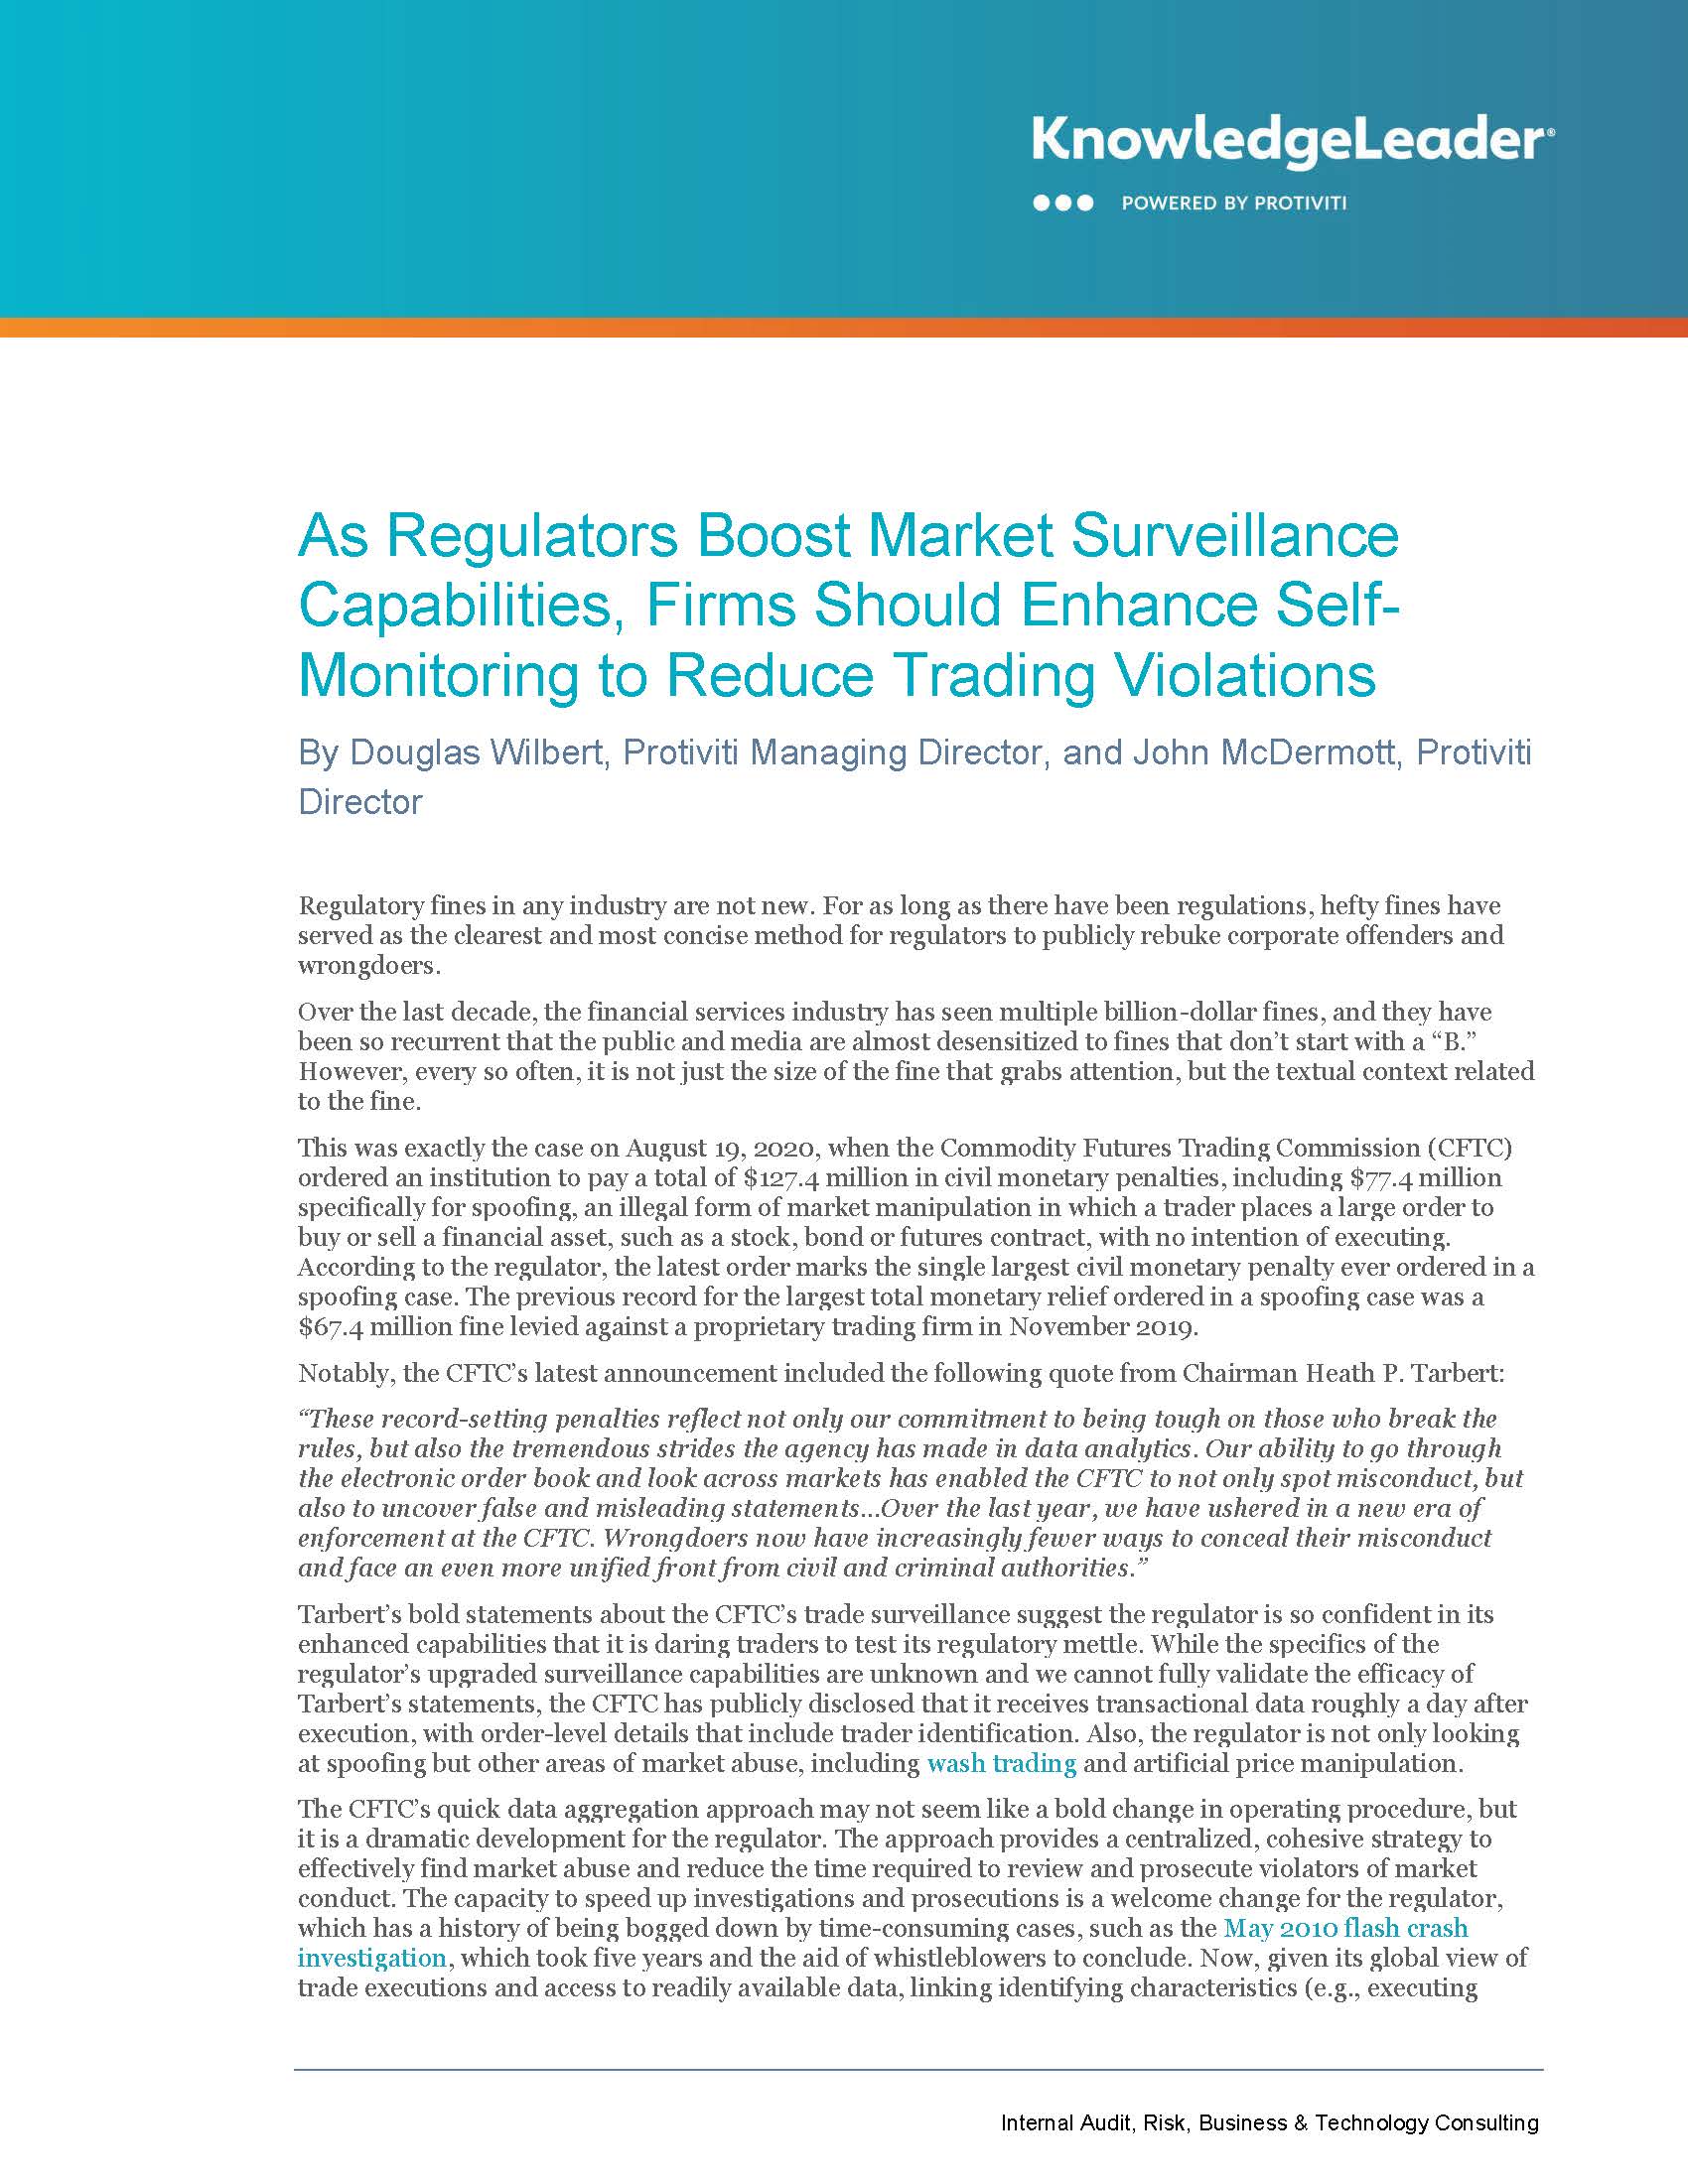 Screenshot of the first page of As Regulators Boost Market Surveillance Capabilities, Firms Should Enhance Self-Monitoring to Reduce Trading Violations